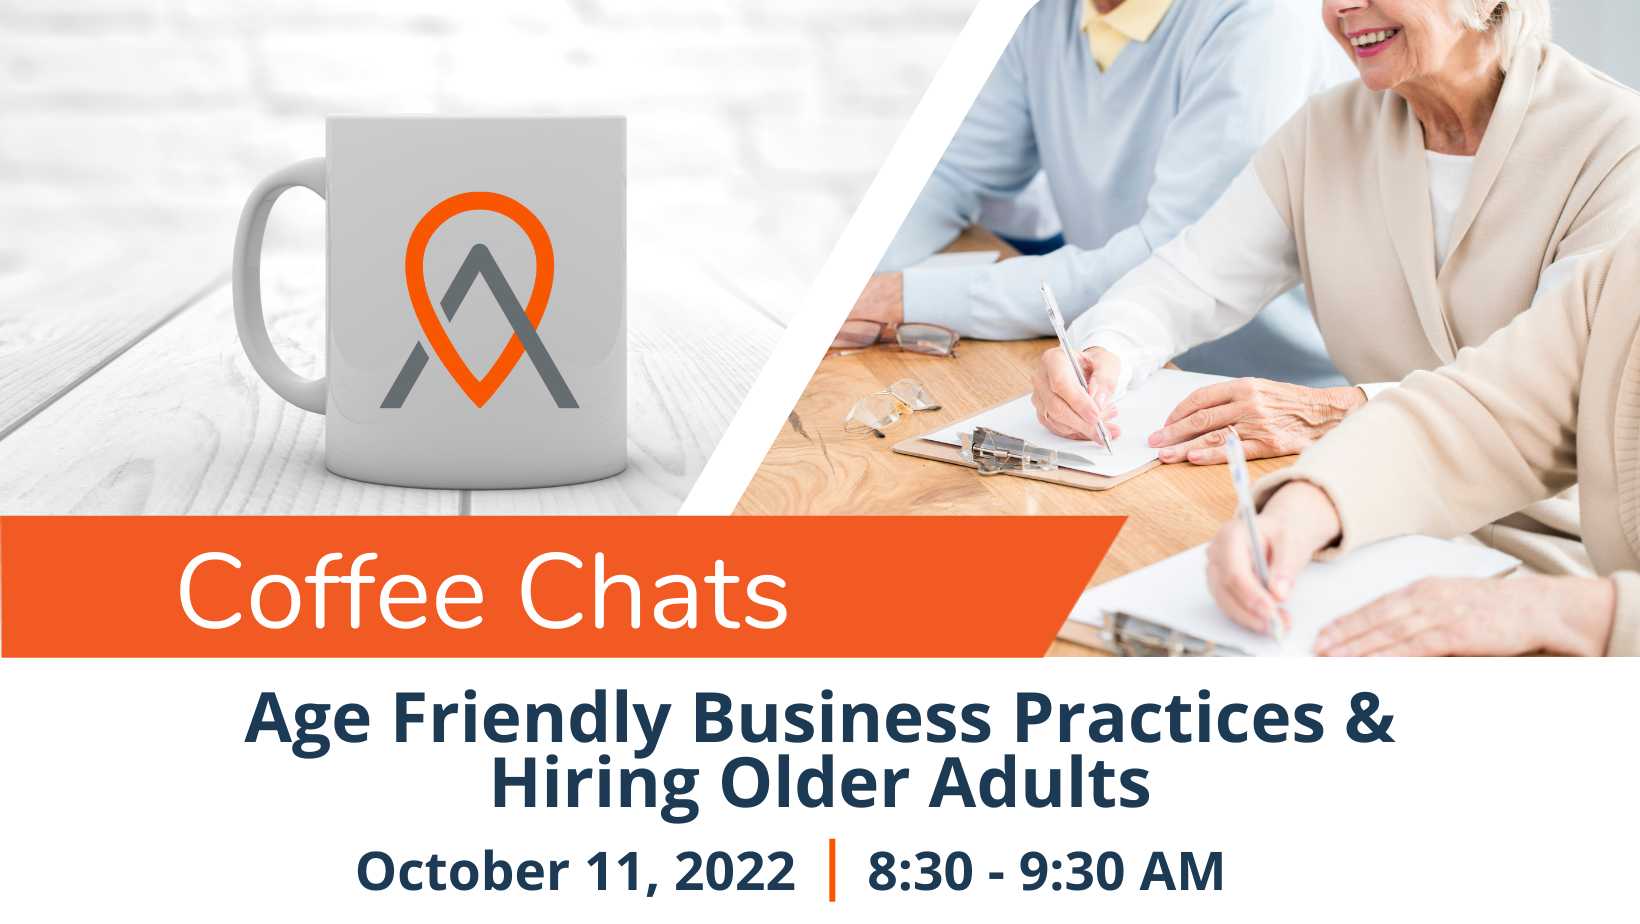 Event Promo Photo For Coffee Chats: Age Friendly Business Practices & Hiring Older Adults